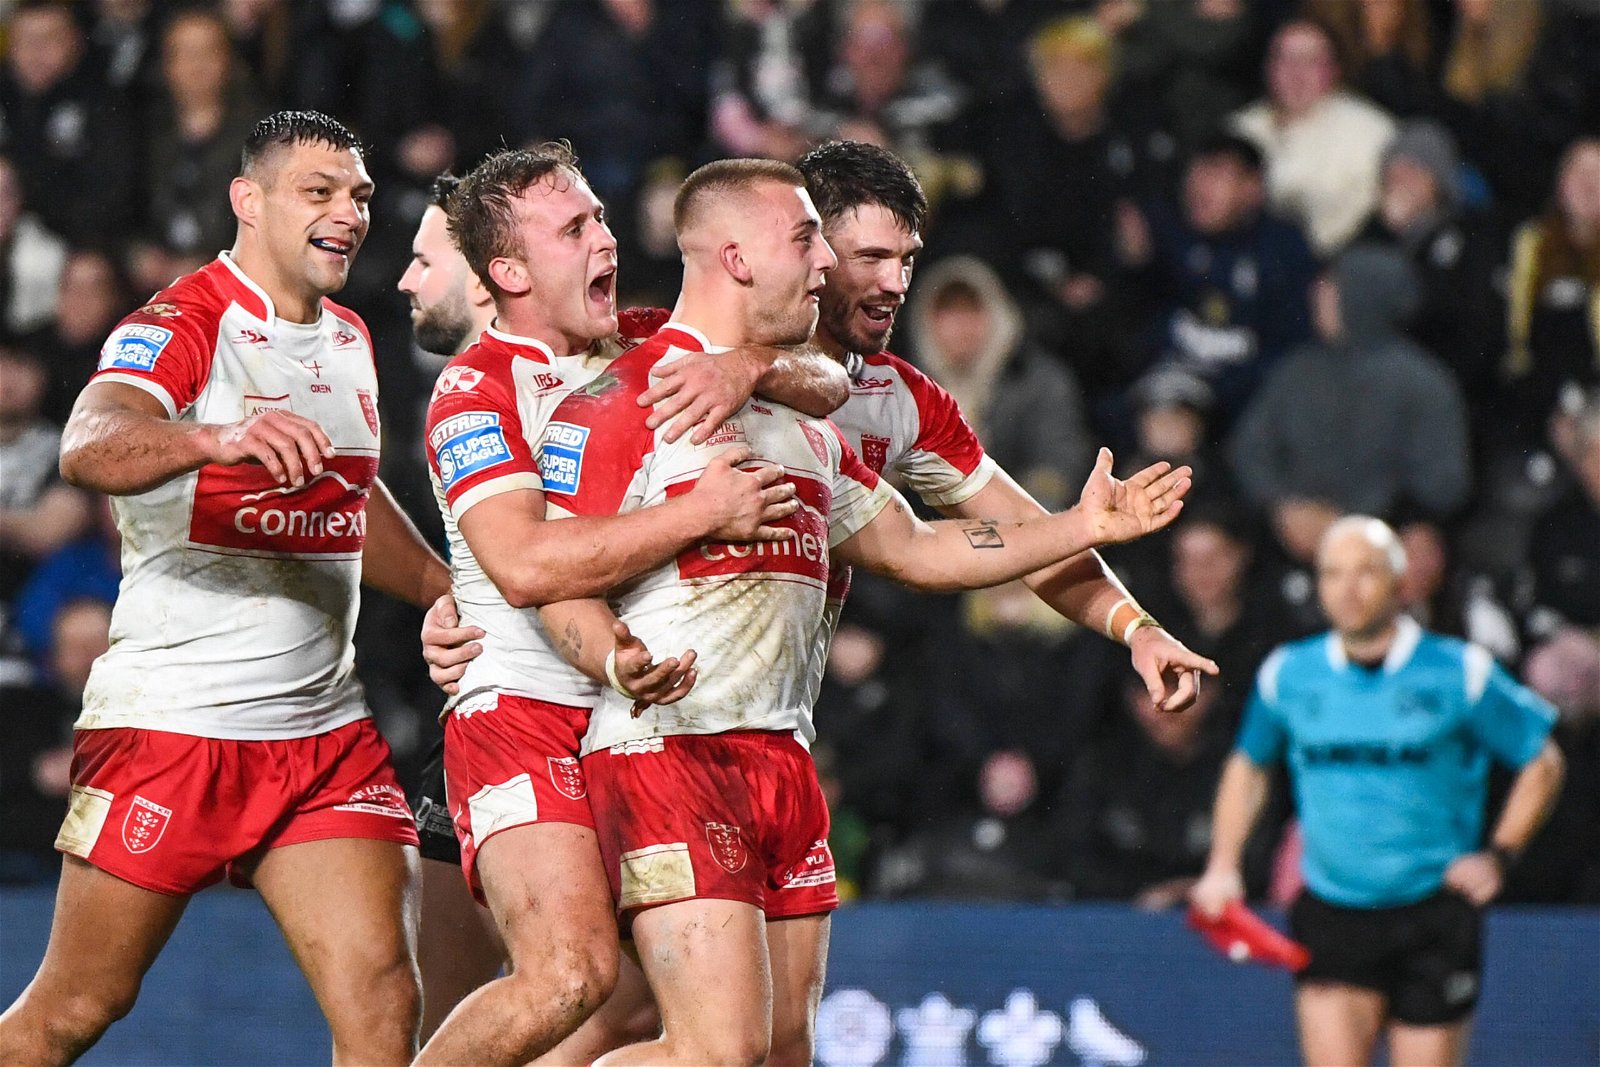 Hull Kr celebrate a win on Super League opening night.